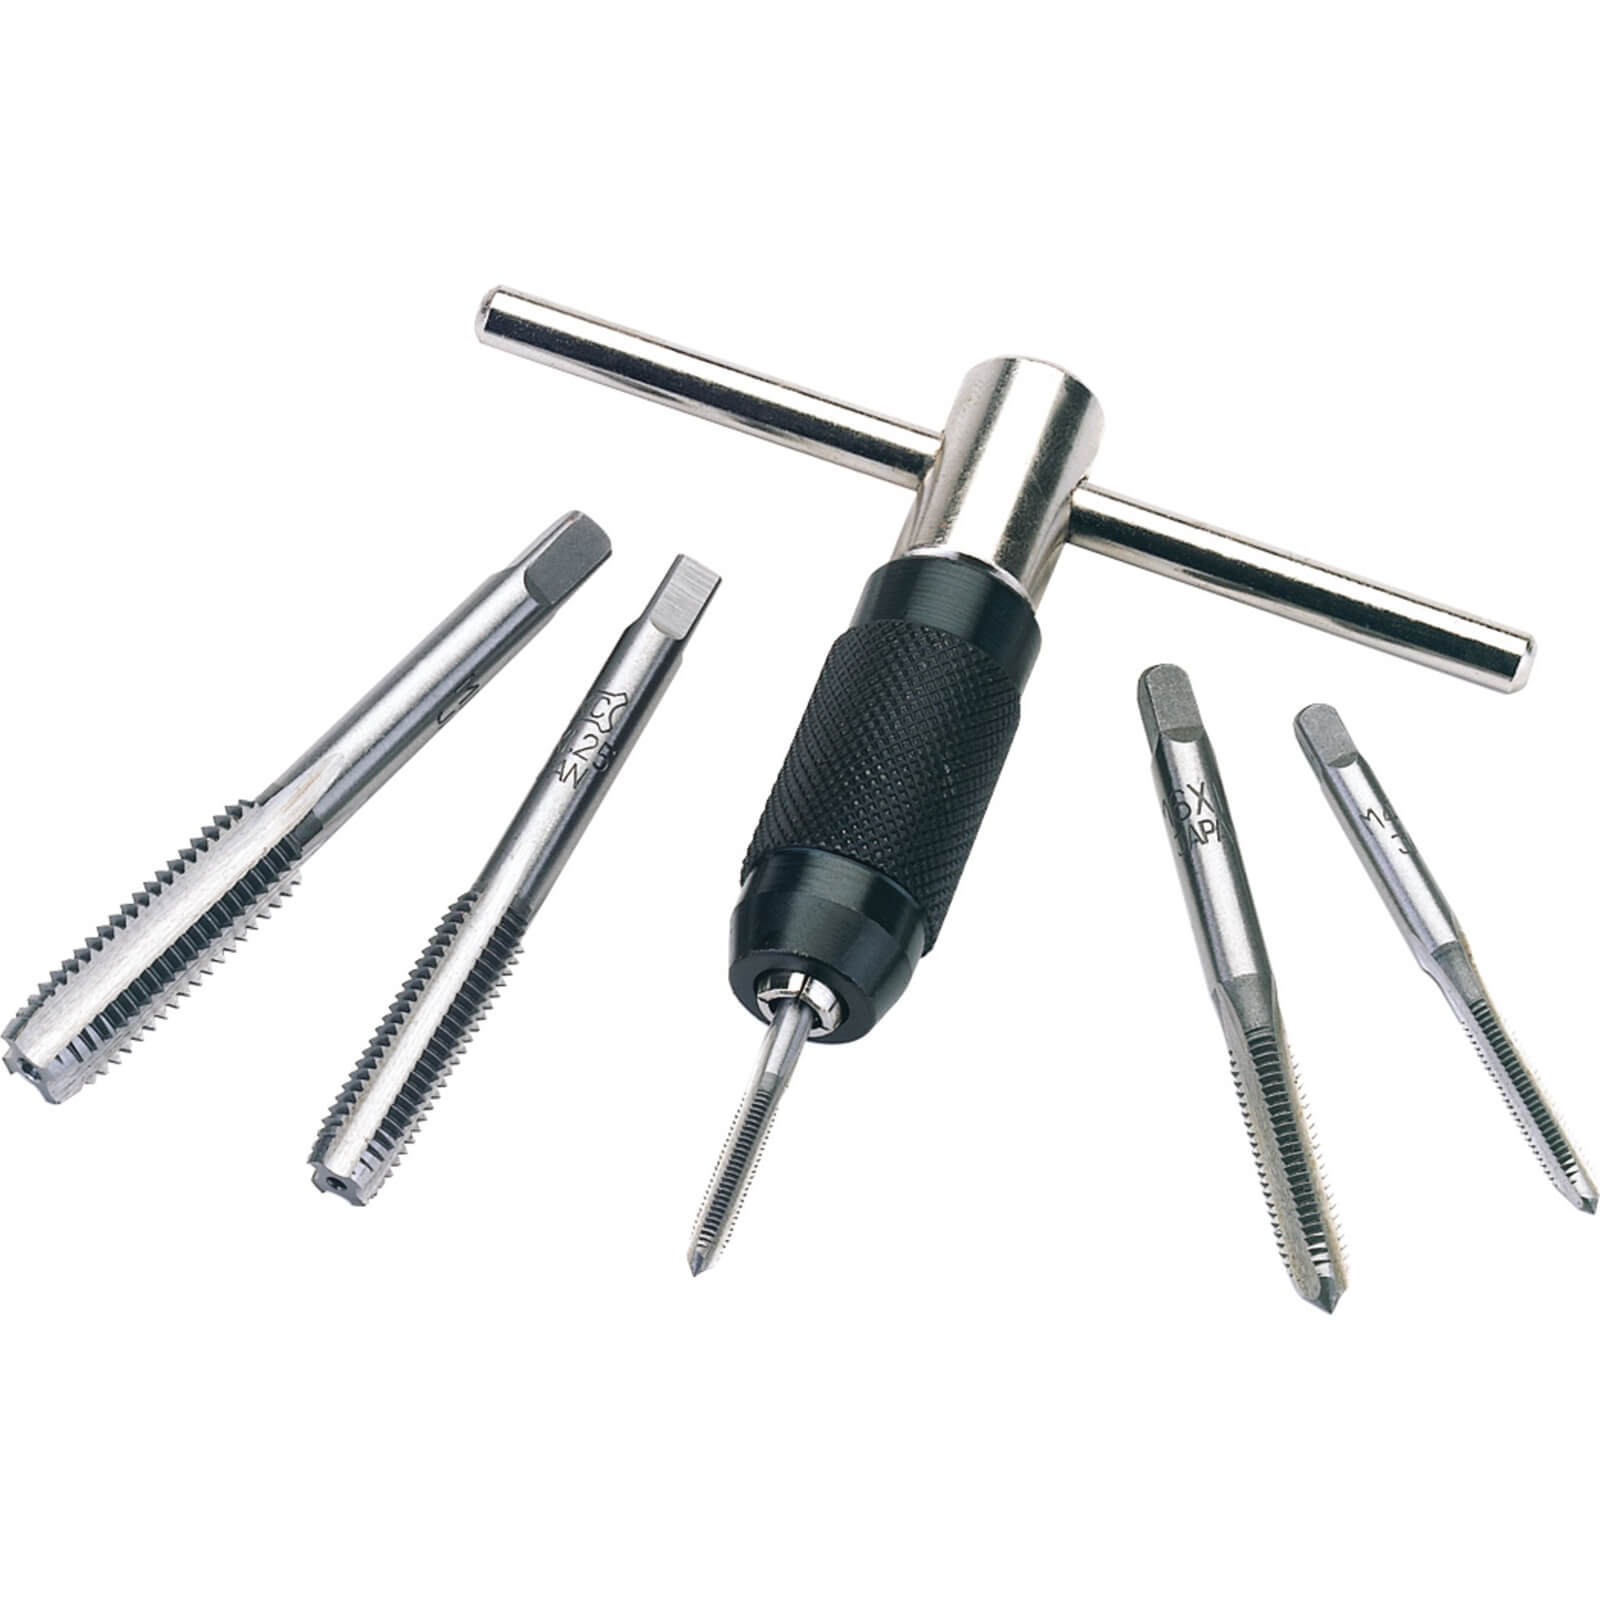 Image of Draper 6 Piece Tap and Wrench Set Metric